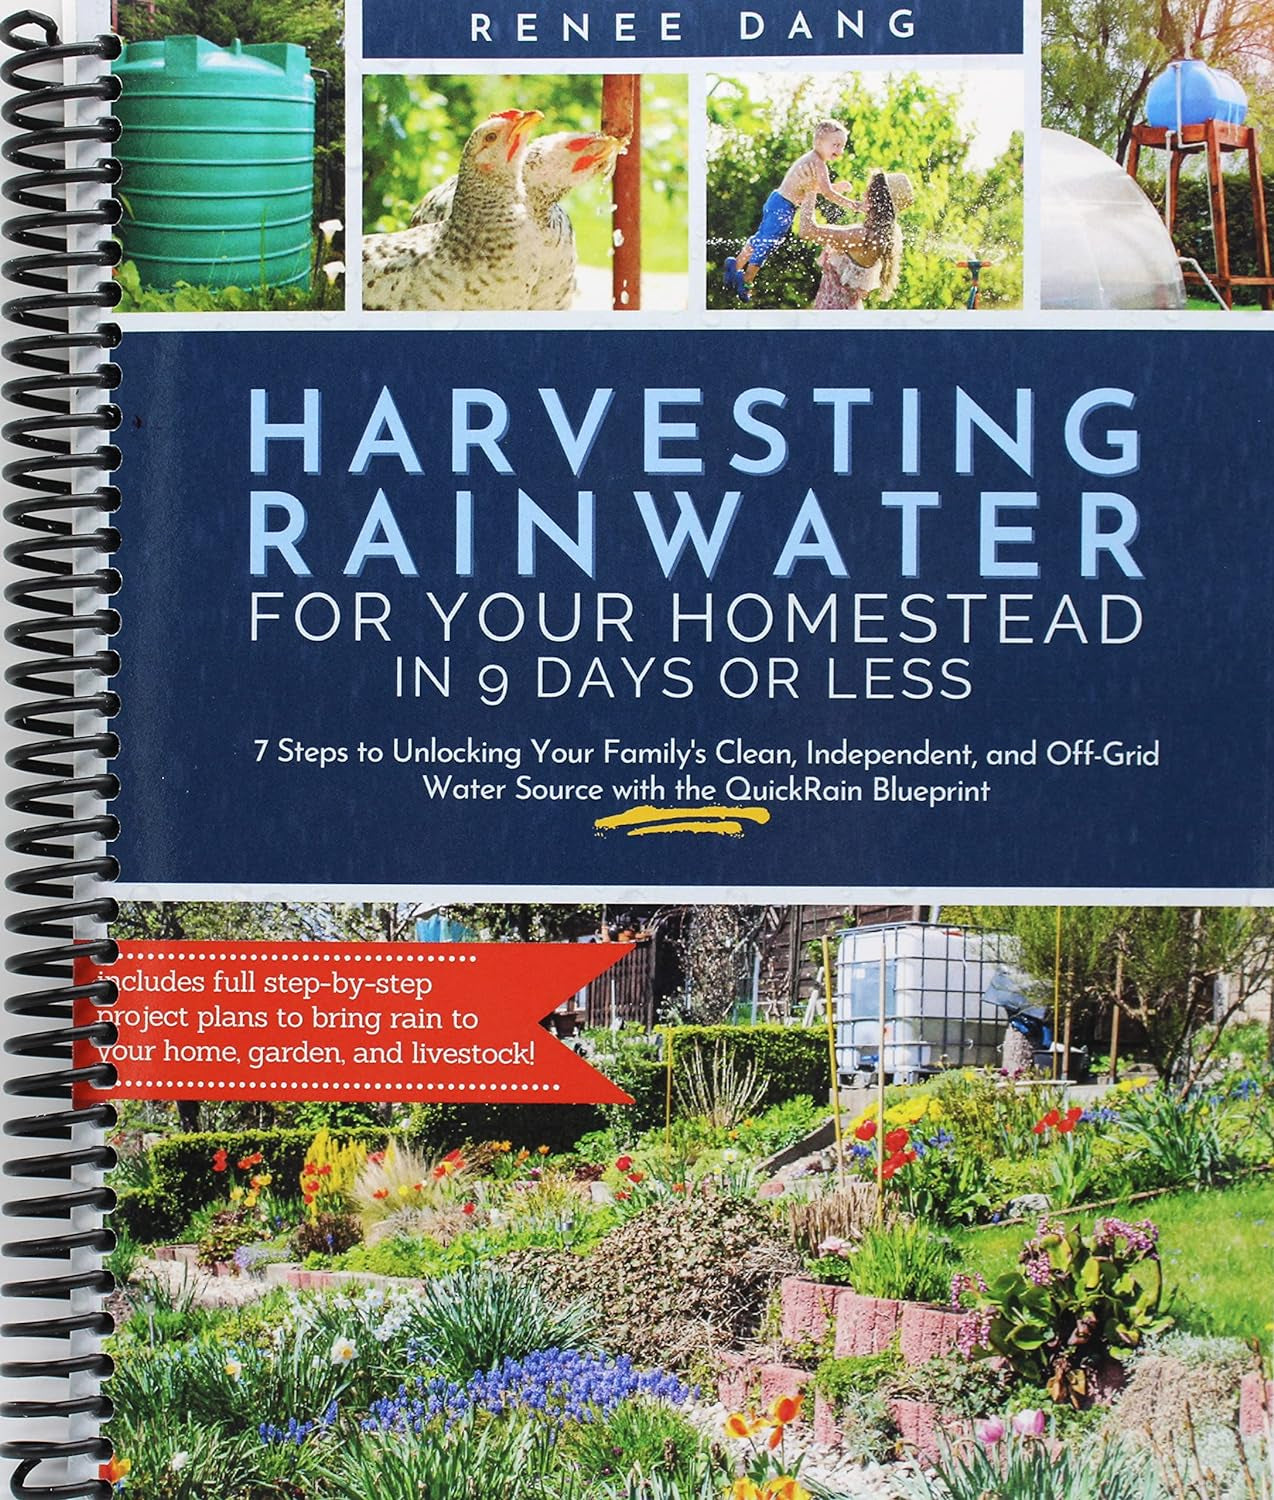 Harvesting Rainwater for Your Homestead in 9 Days or Less: 7 Steps to Unlocking Your Family'S Clean, Independent, and Off-Grid Water Source with the Quickrain Blueprint